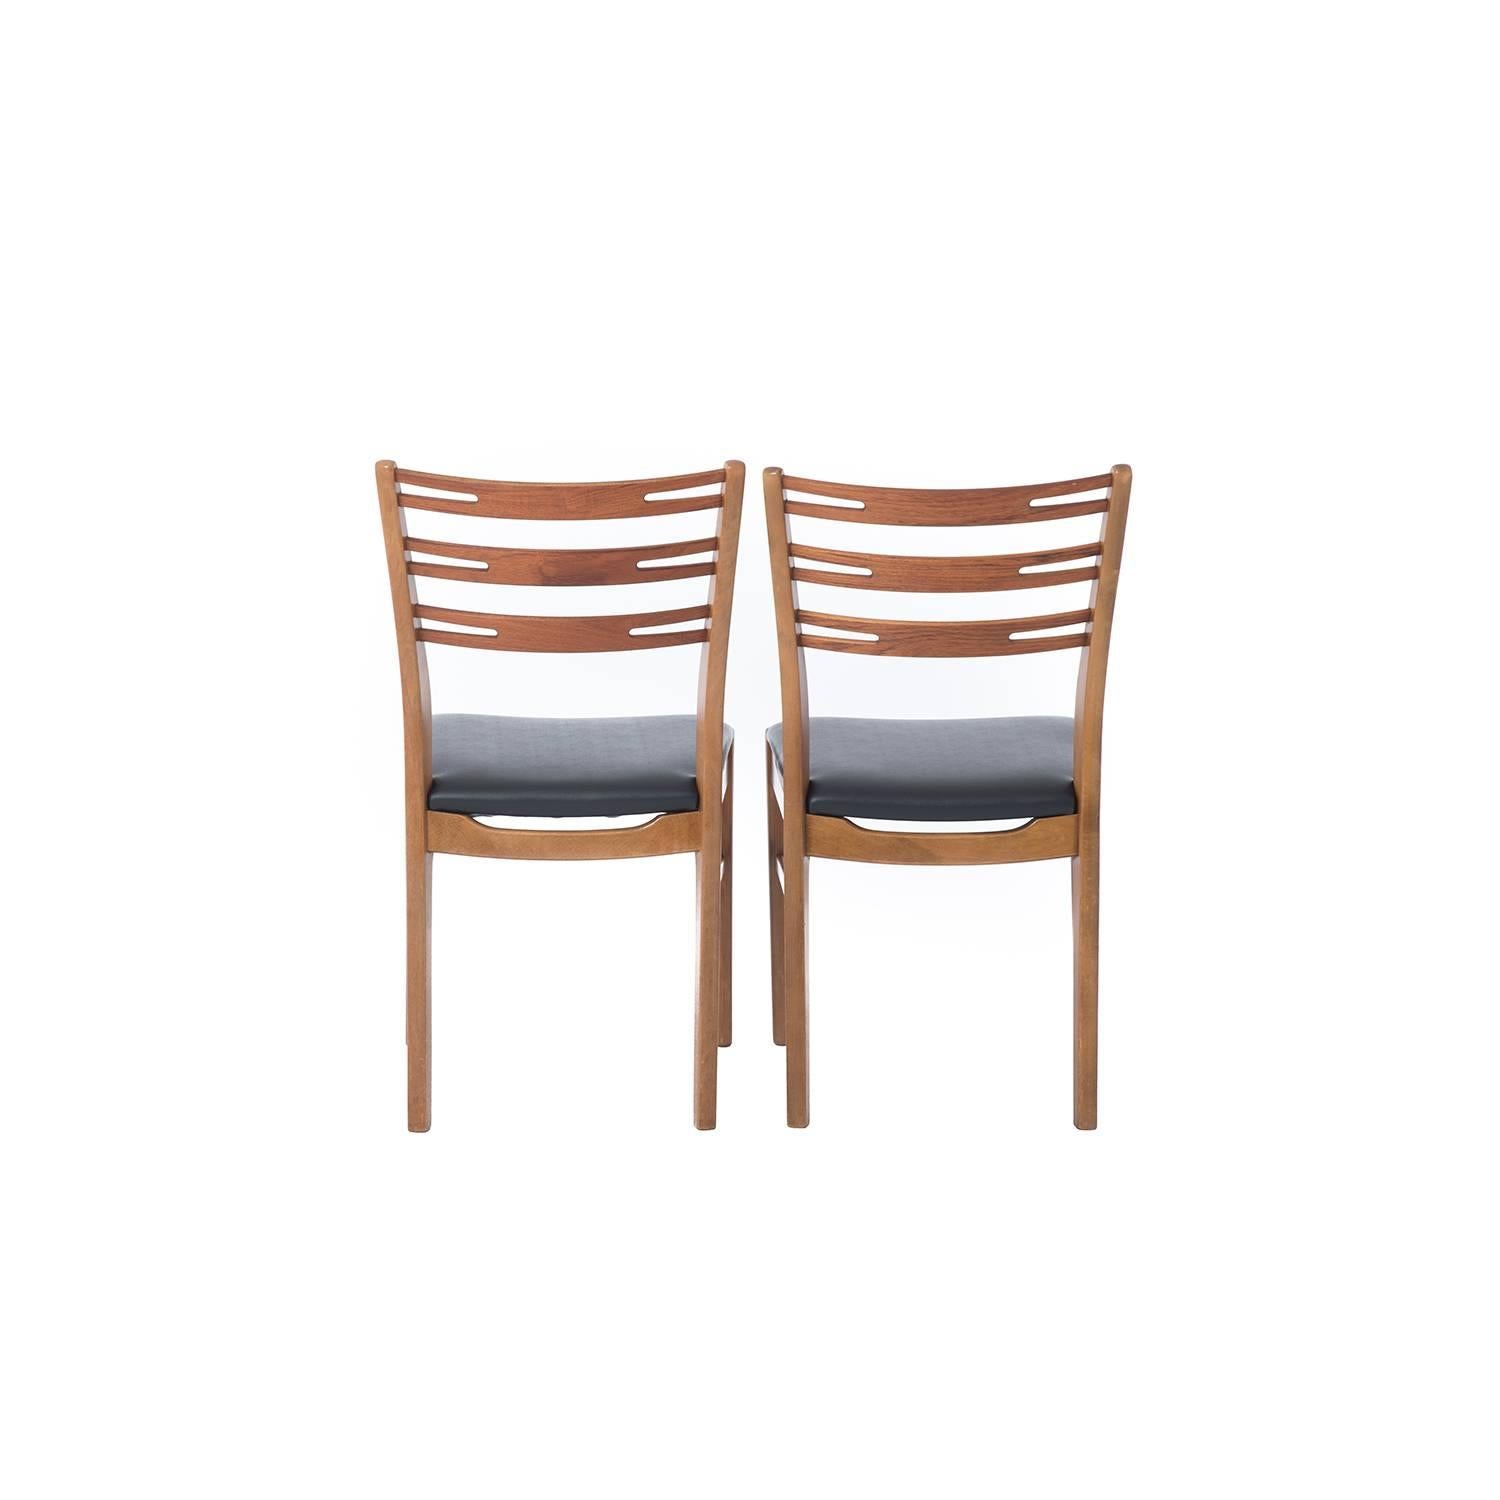 Lacquered Danish Modern Notched Ladder-Back Dining Chairs